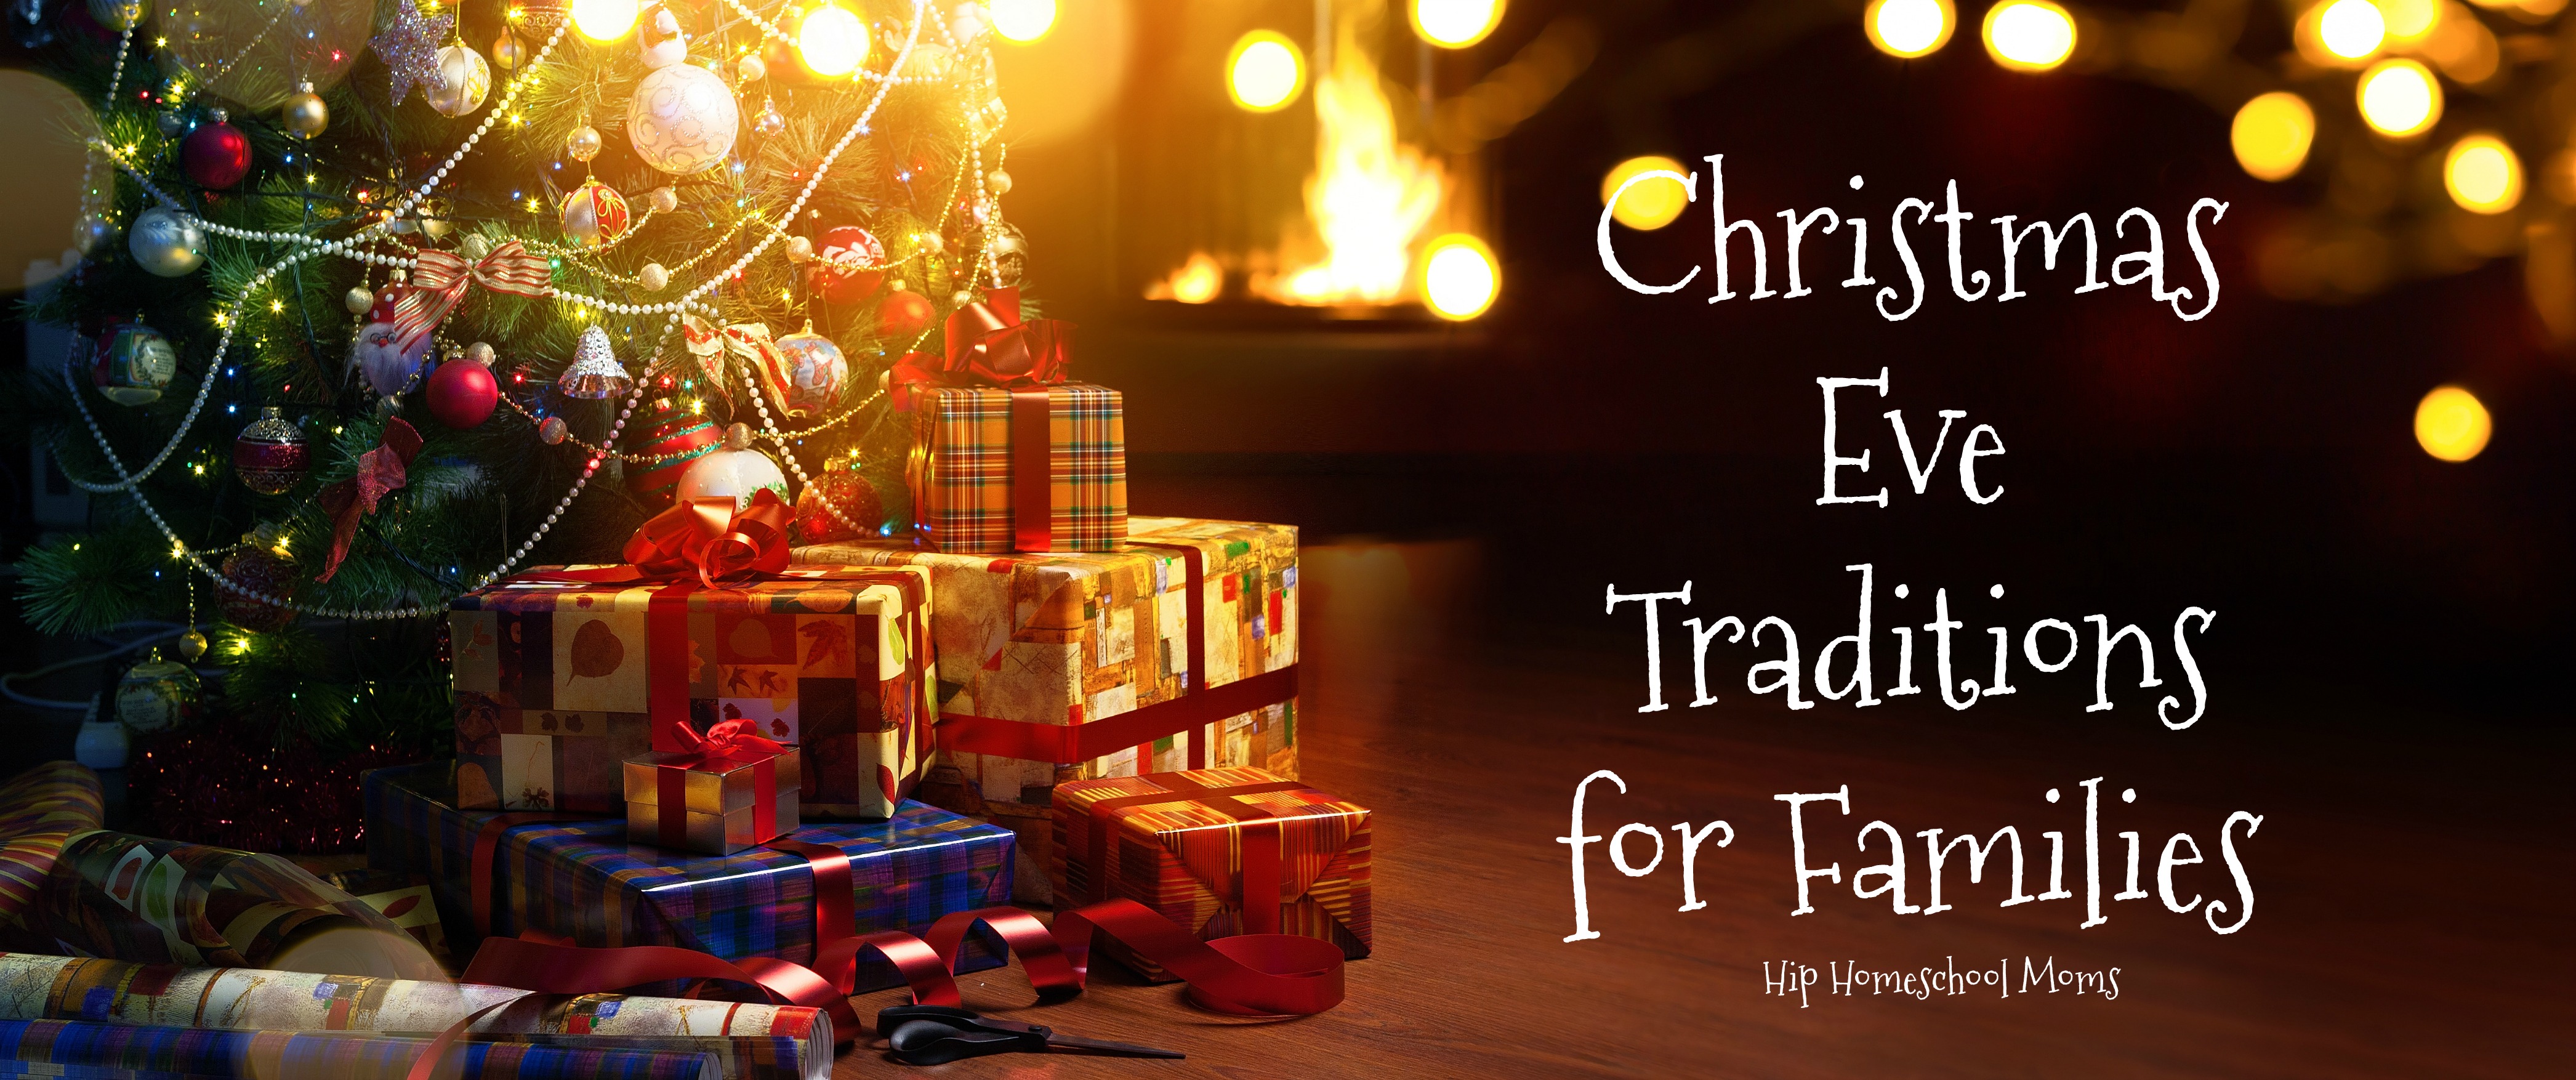 Christmas Eve Traditions for Families | Hip Homeschool Moms